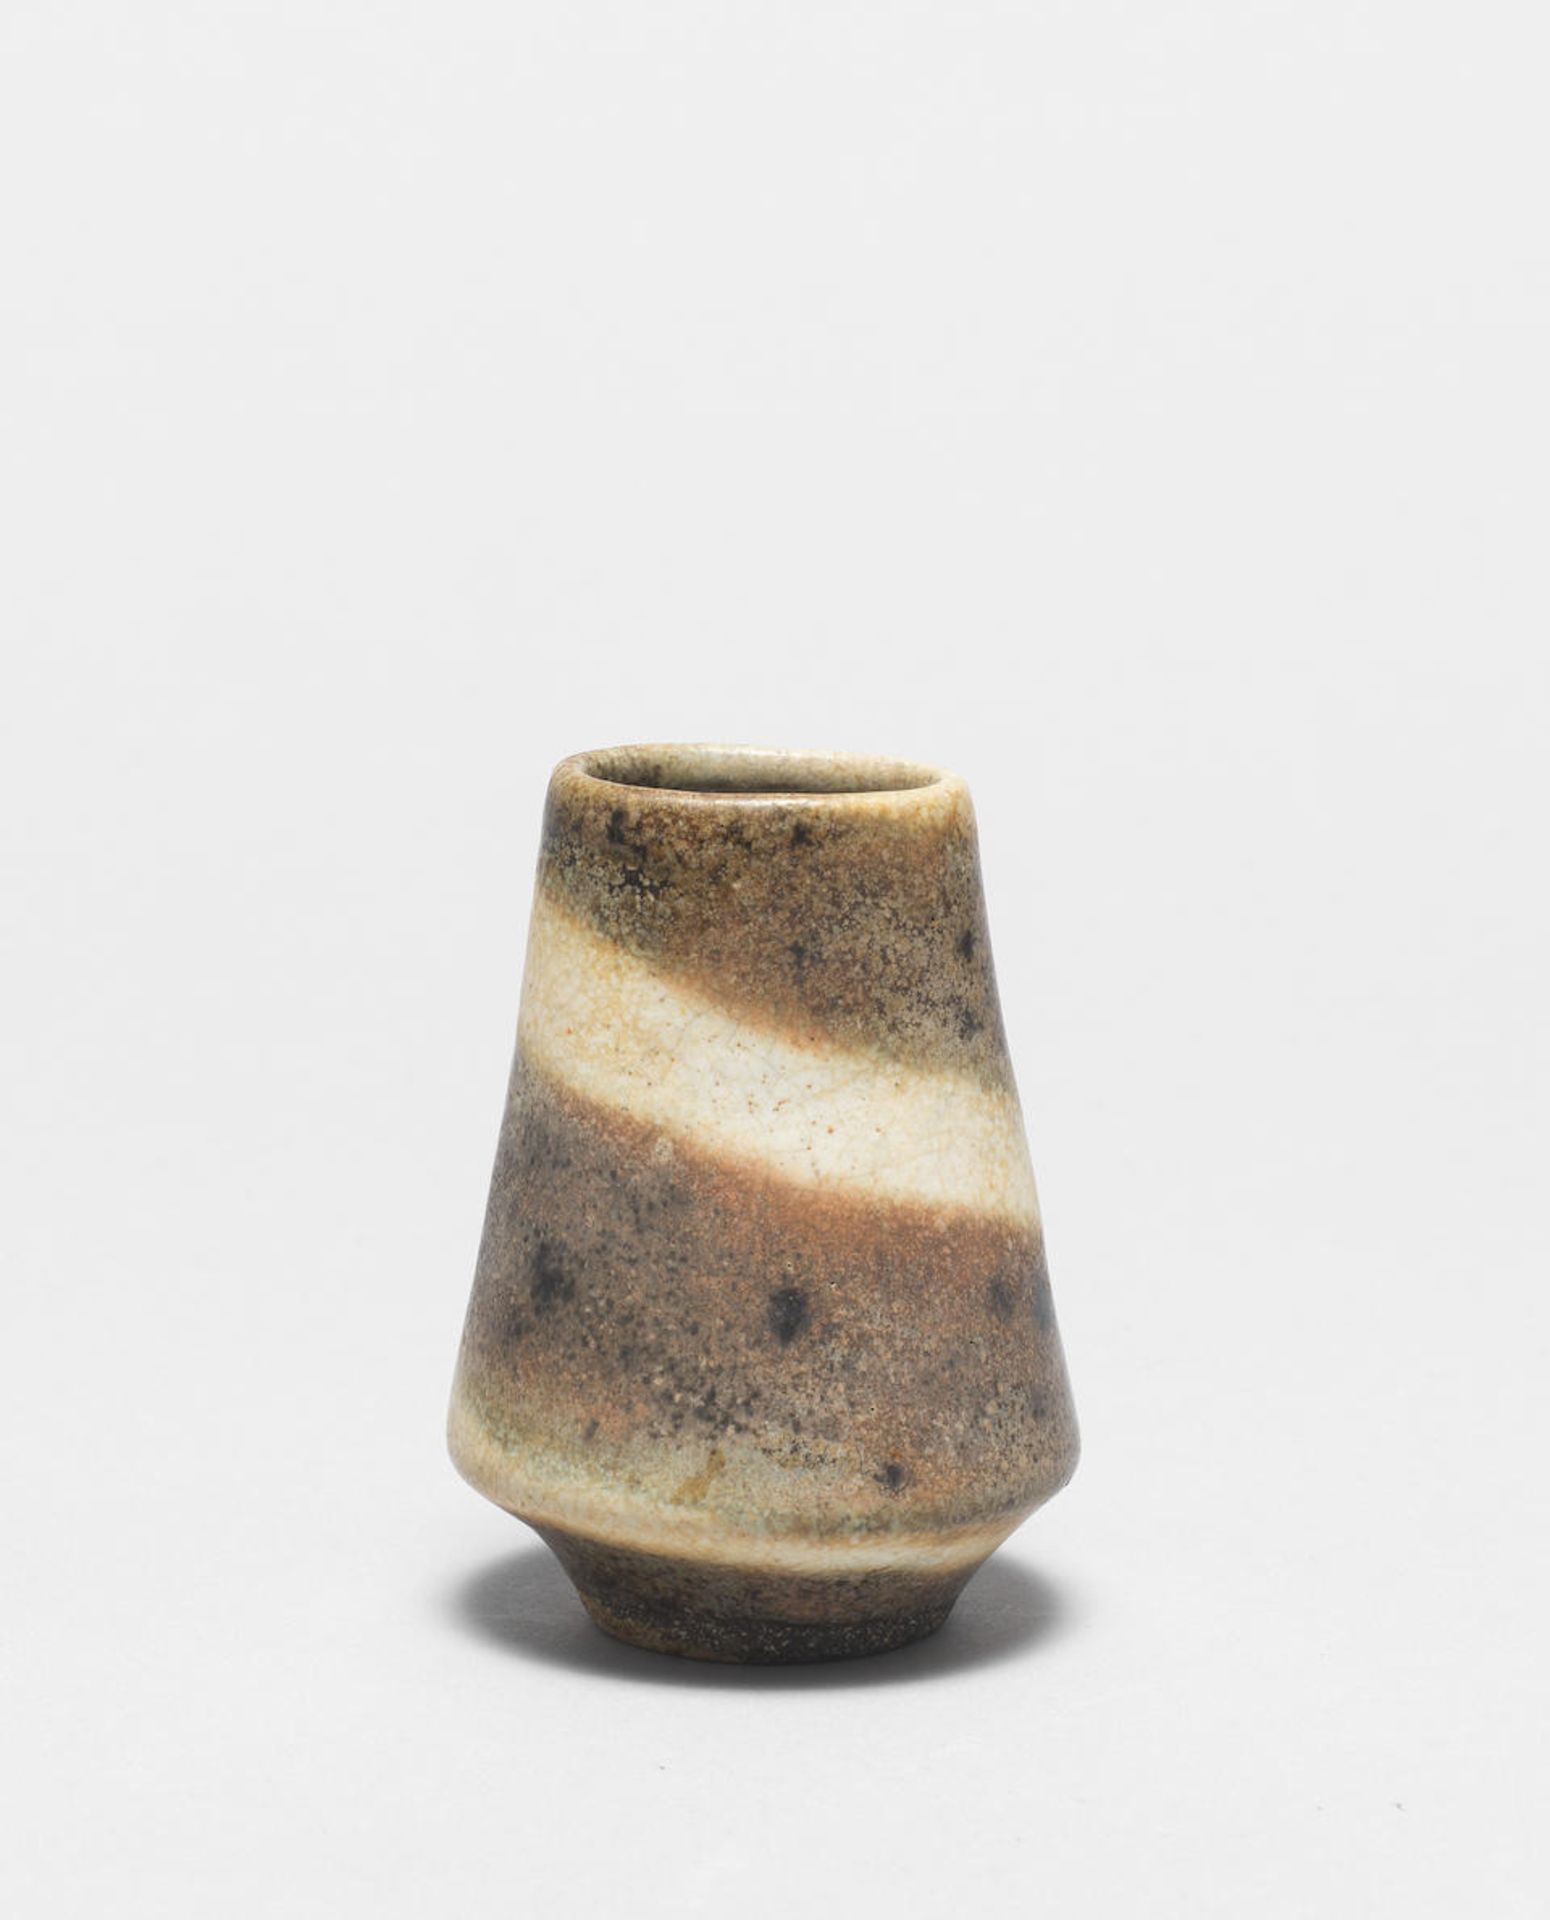 Lucie Rie Small vase, circa 1975 - Image 2 of 2